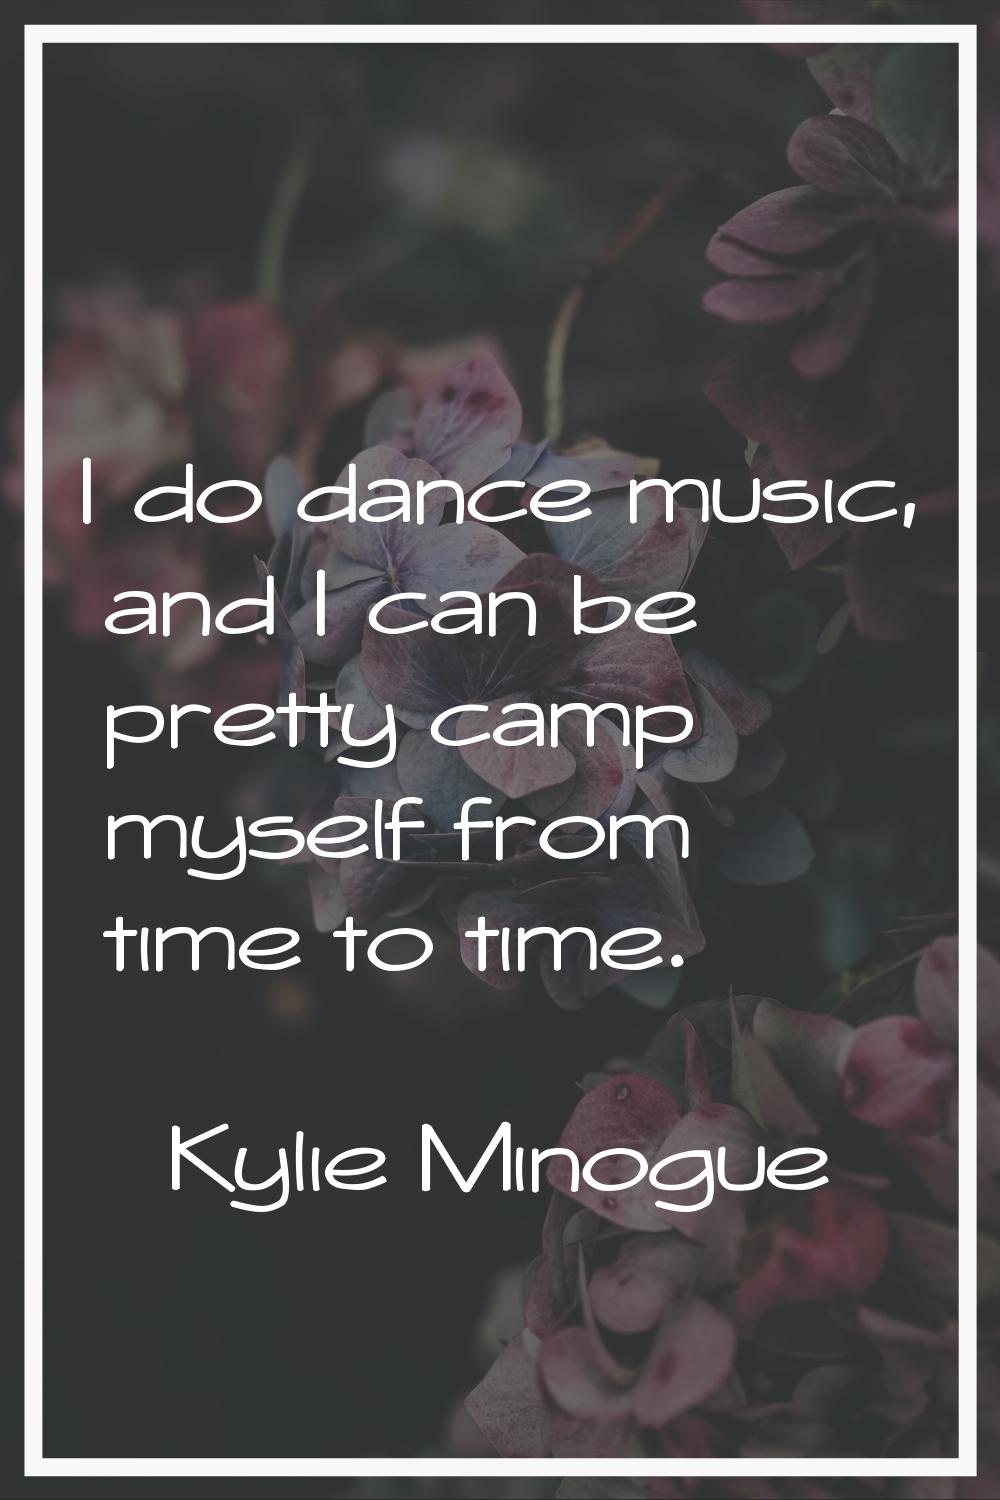 I do dance music, and I can be pretty camp myself from time to time.